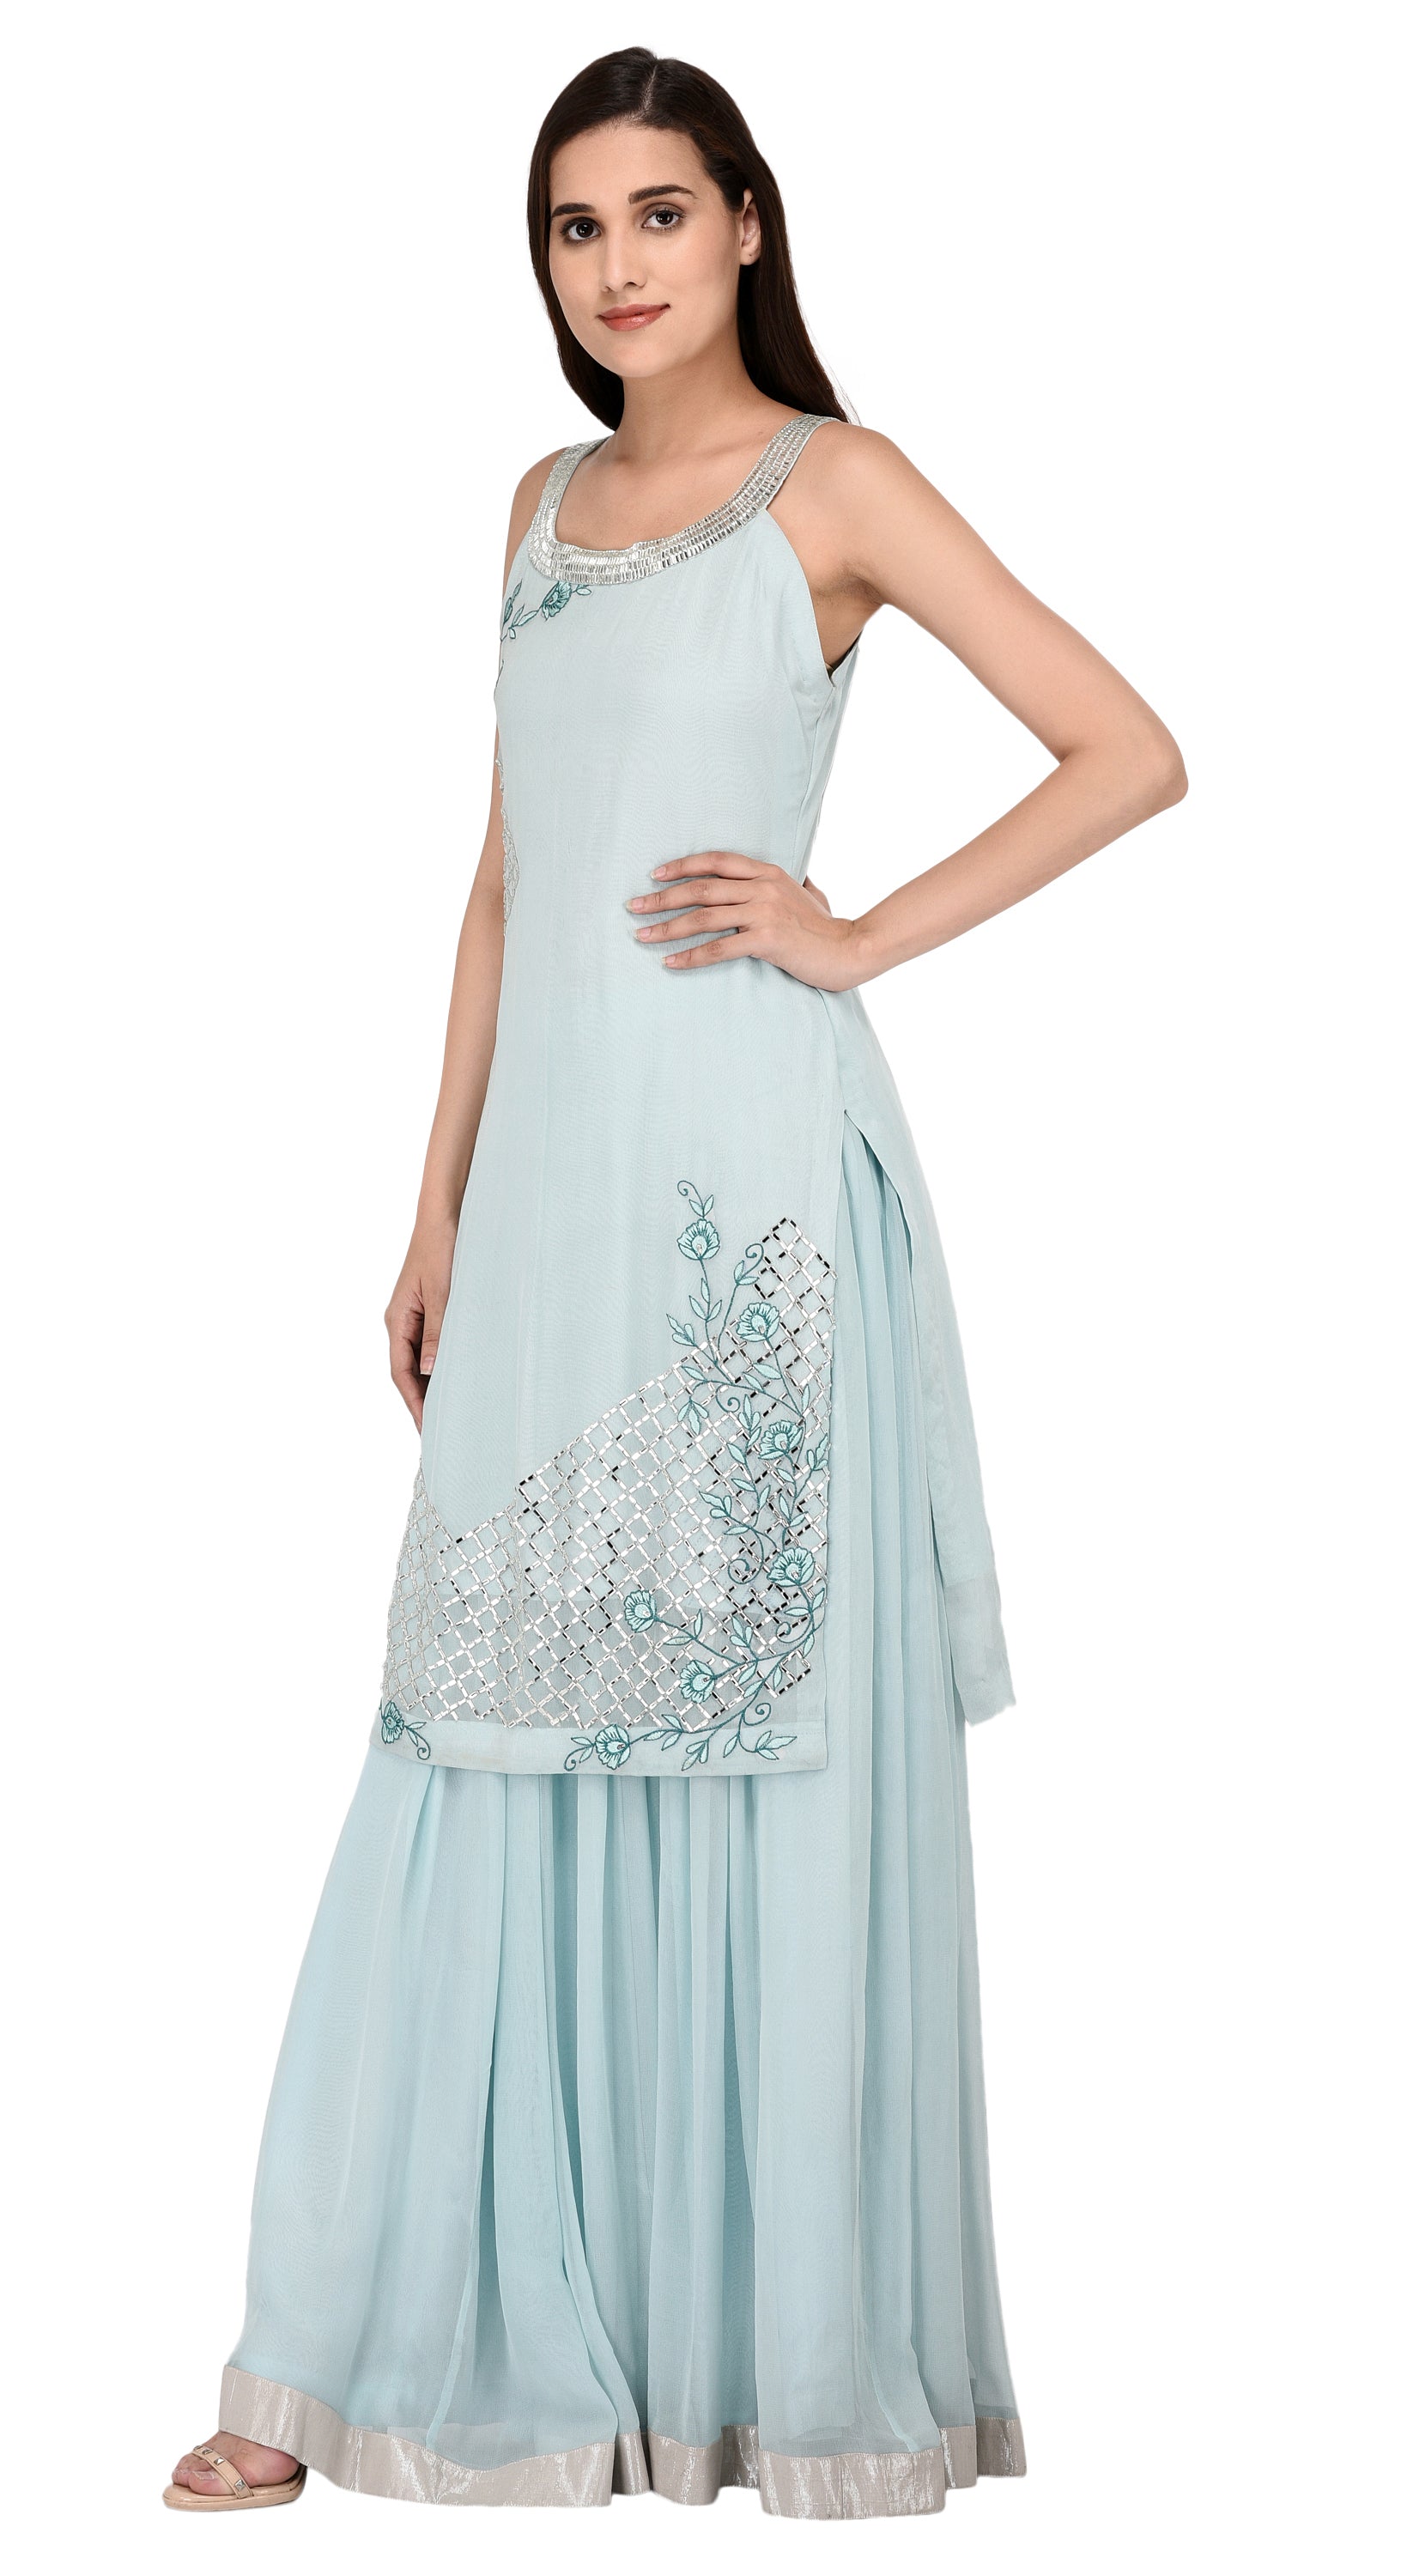 Women's Light Blue Embroidered Halter Neck Kurta With Georgette Lehanga Set - MIRACOLOS by Ruchi